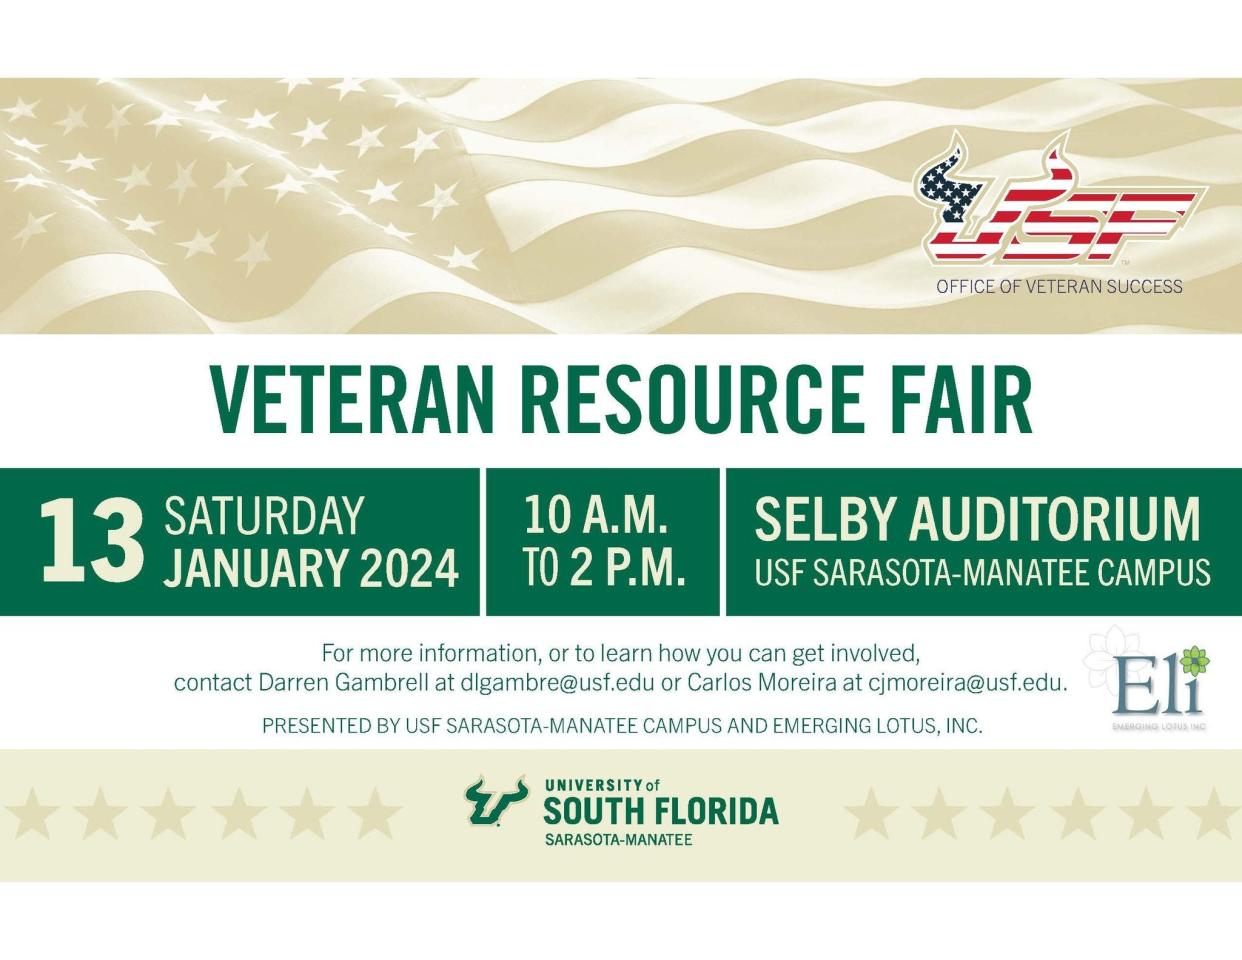 The University of South Florida Sarasota-Manatee campus will host a public Veterans Resource Fair on Saturday, Jan. 13 at the Selby Auditorium on campus. The event is open to veterans, families and the general public.